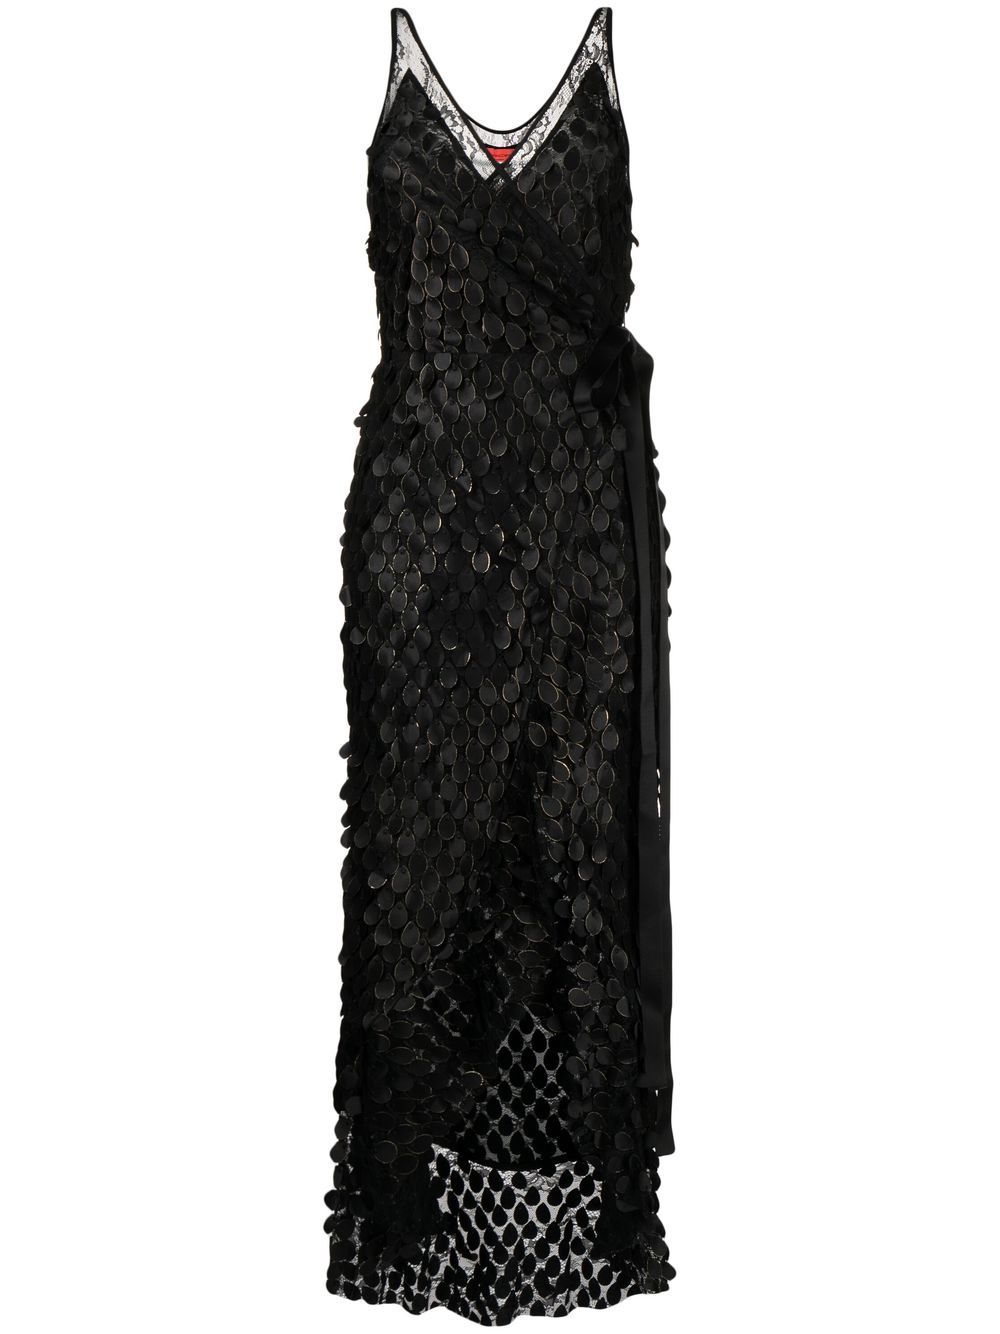 MANNING CARTELL Supreme Extreme Sequinned Dress - Farfetch